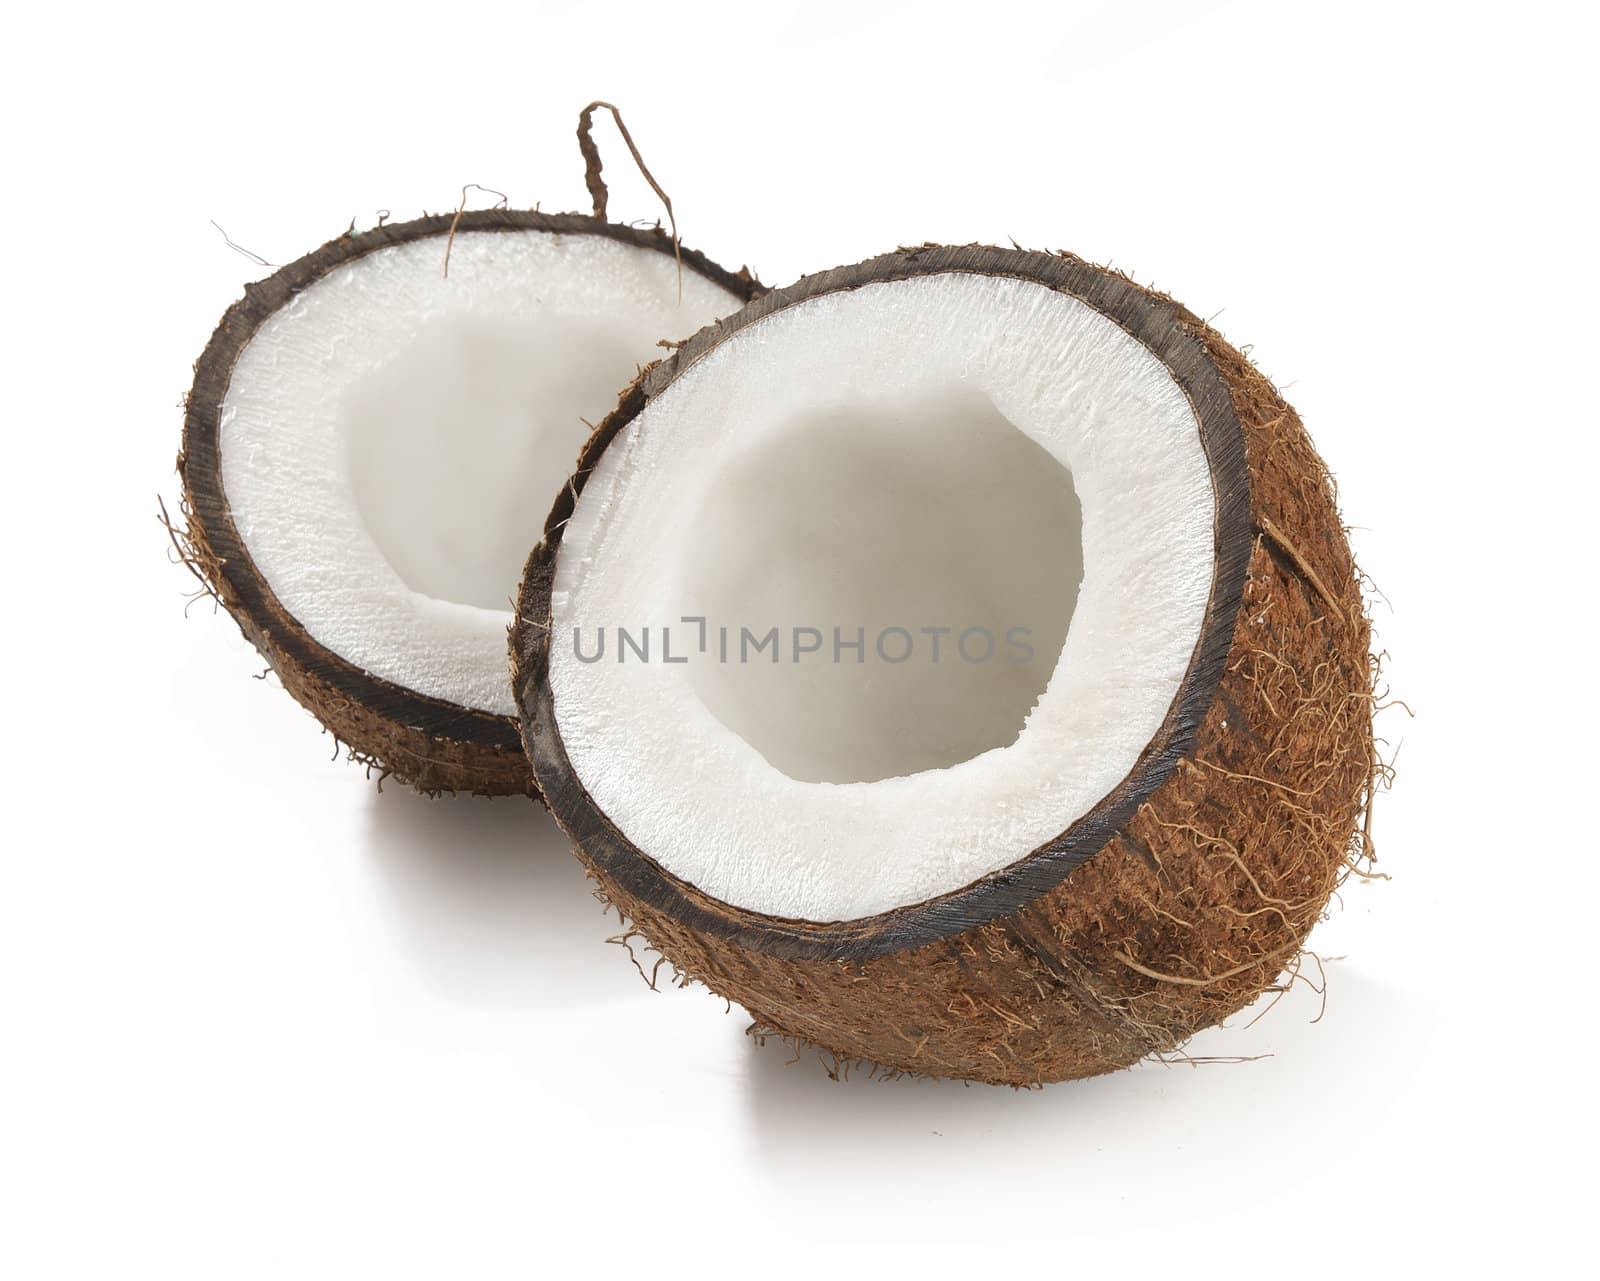 One opened coconut on the white background